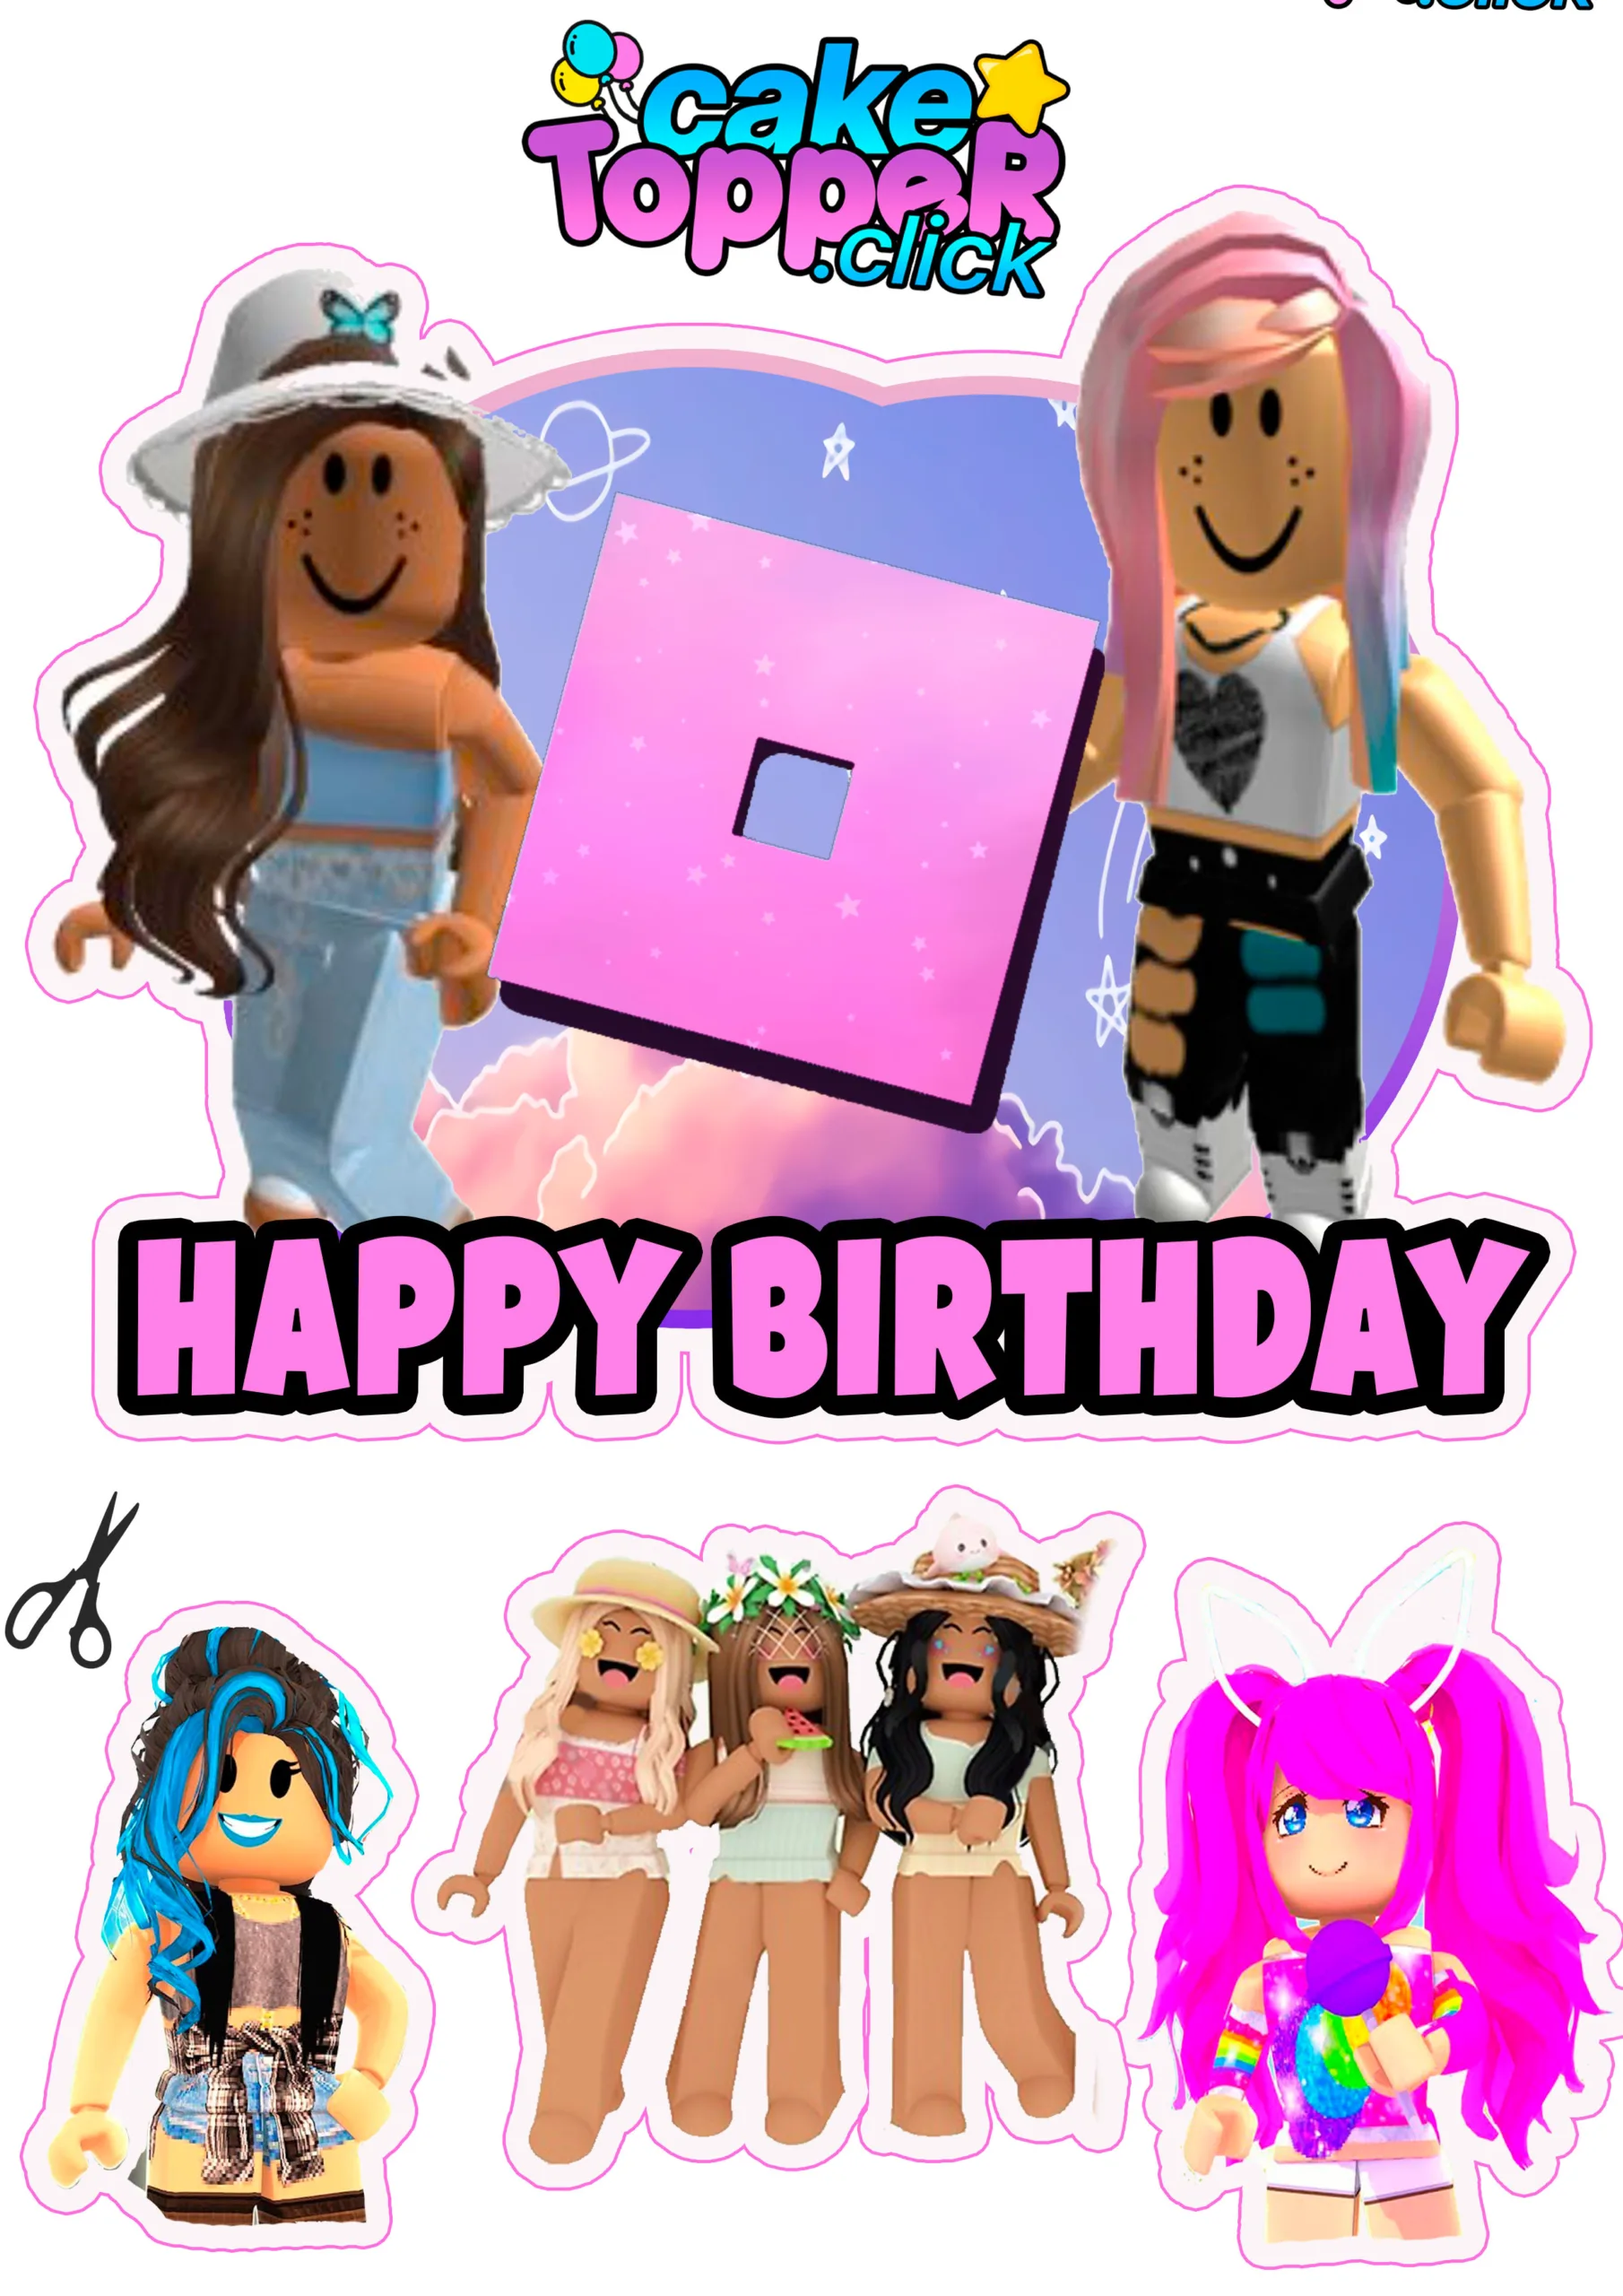 Free Printable Roblox Girl: 4 Creative Ideas and Fun Resources 